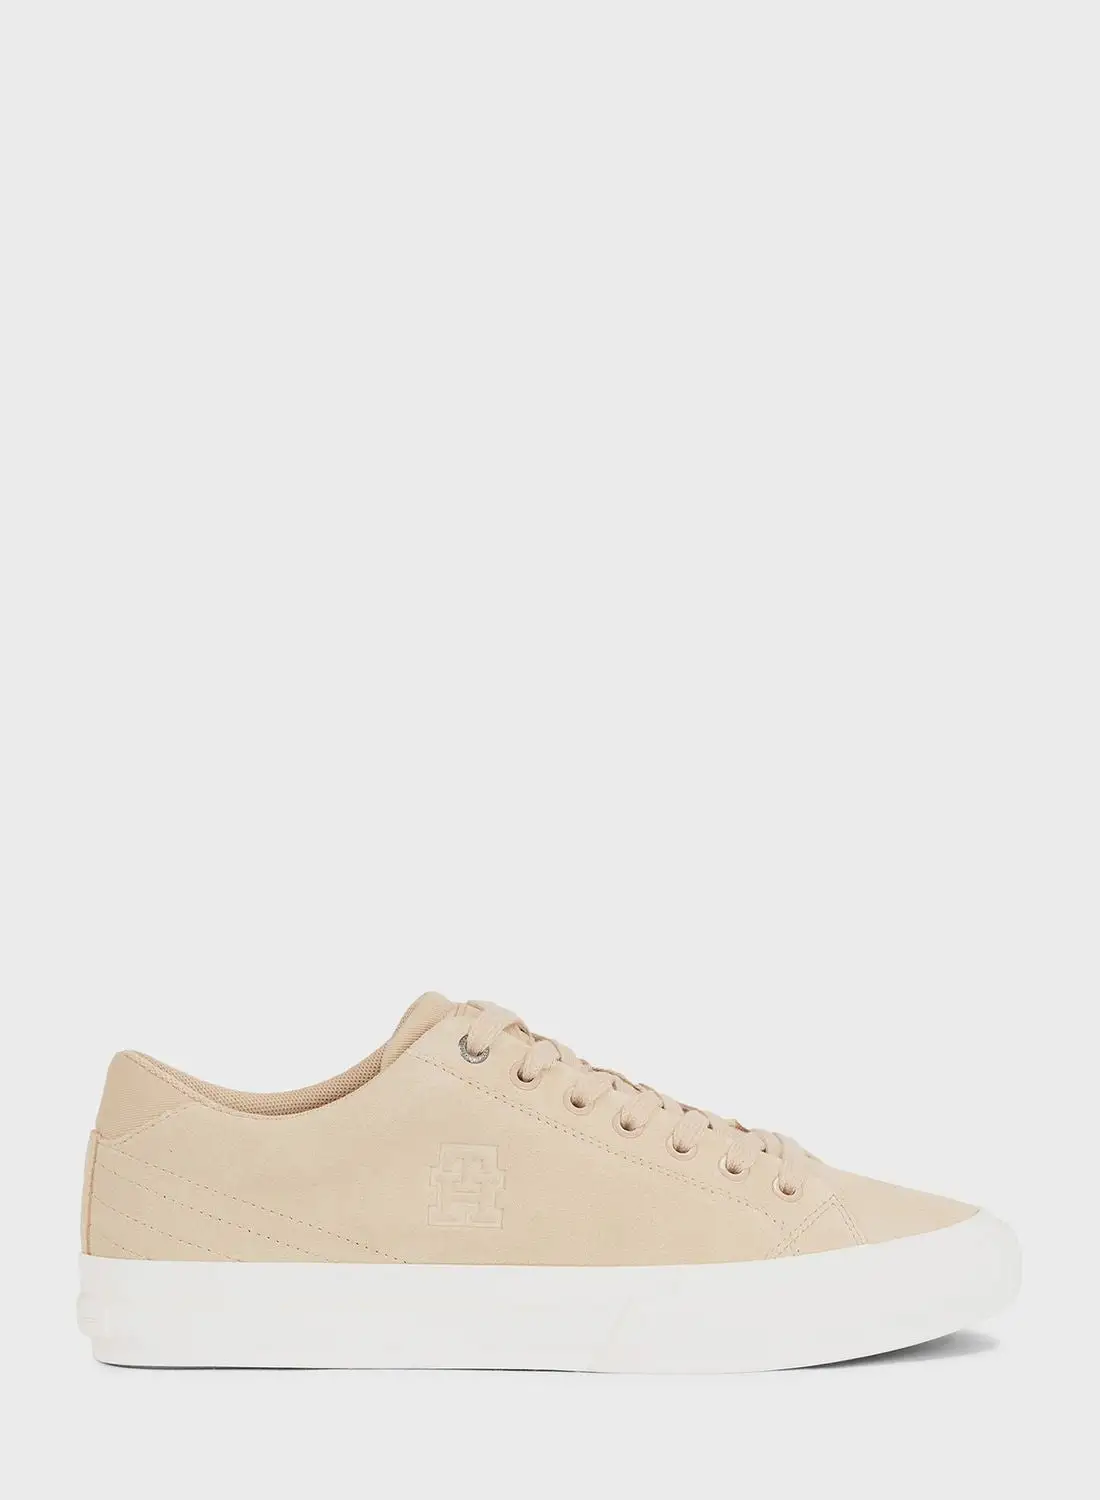 TOMMY HILFIGER Suede Low Top Sneakers